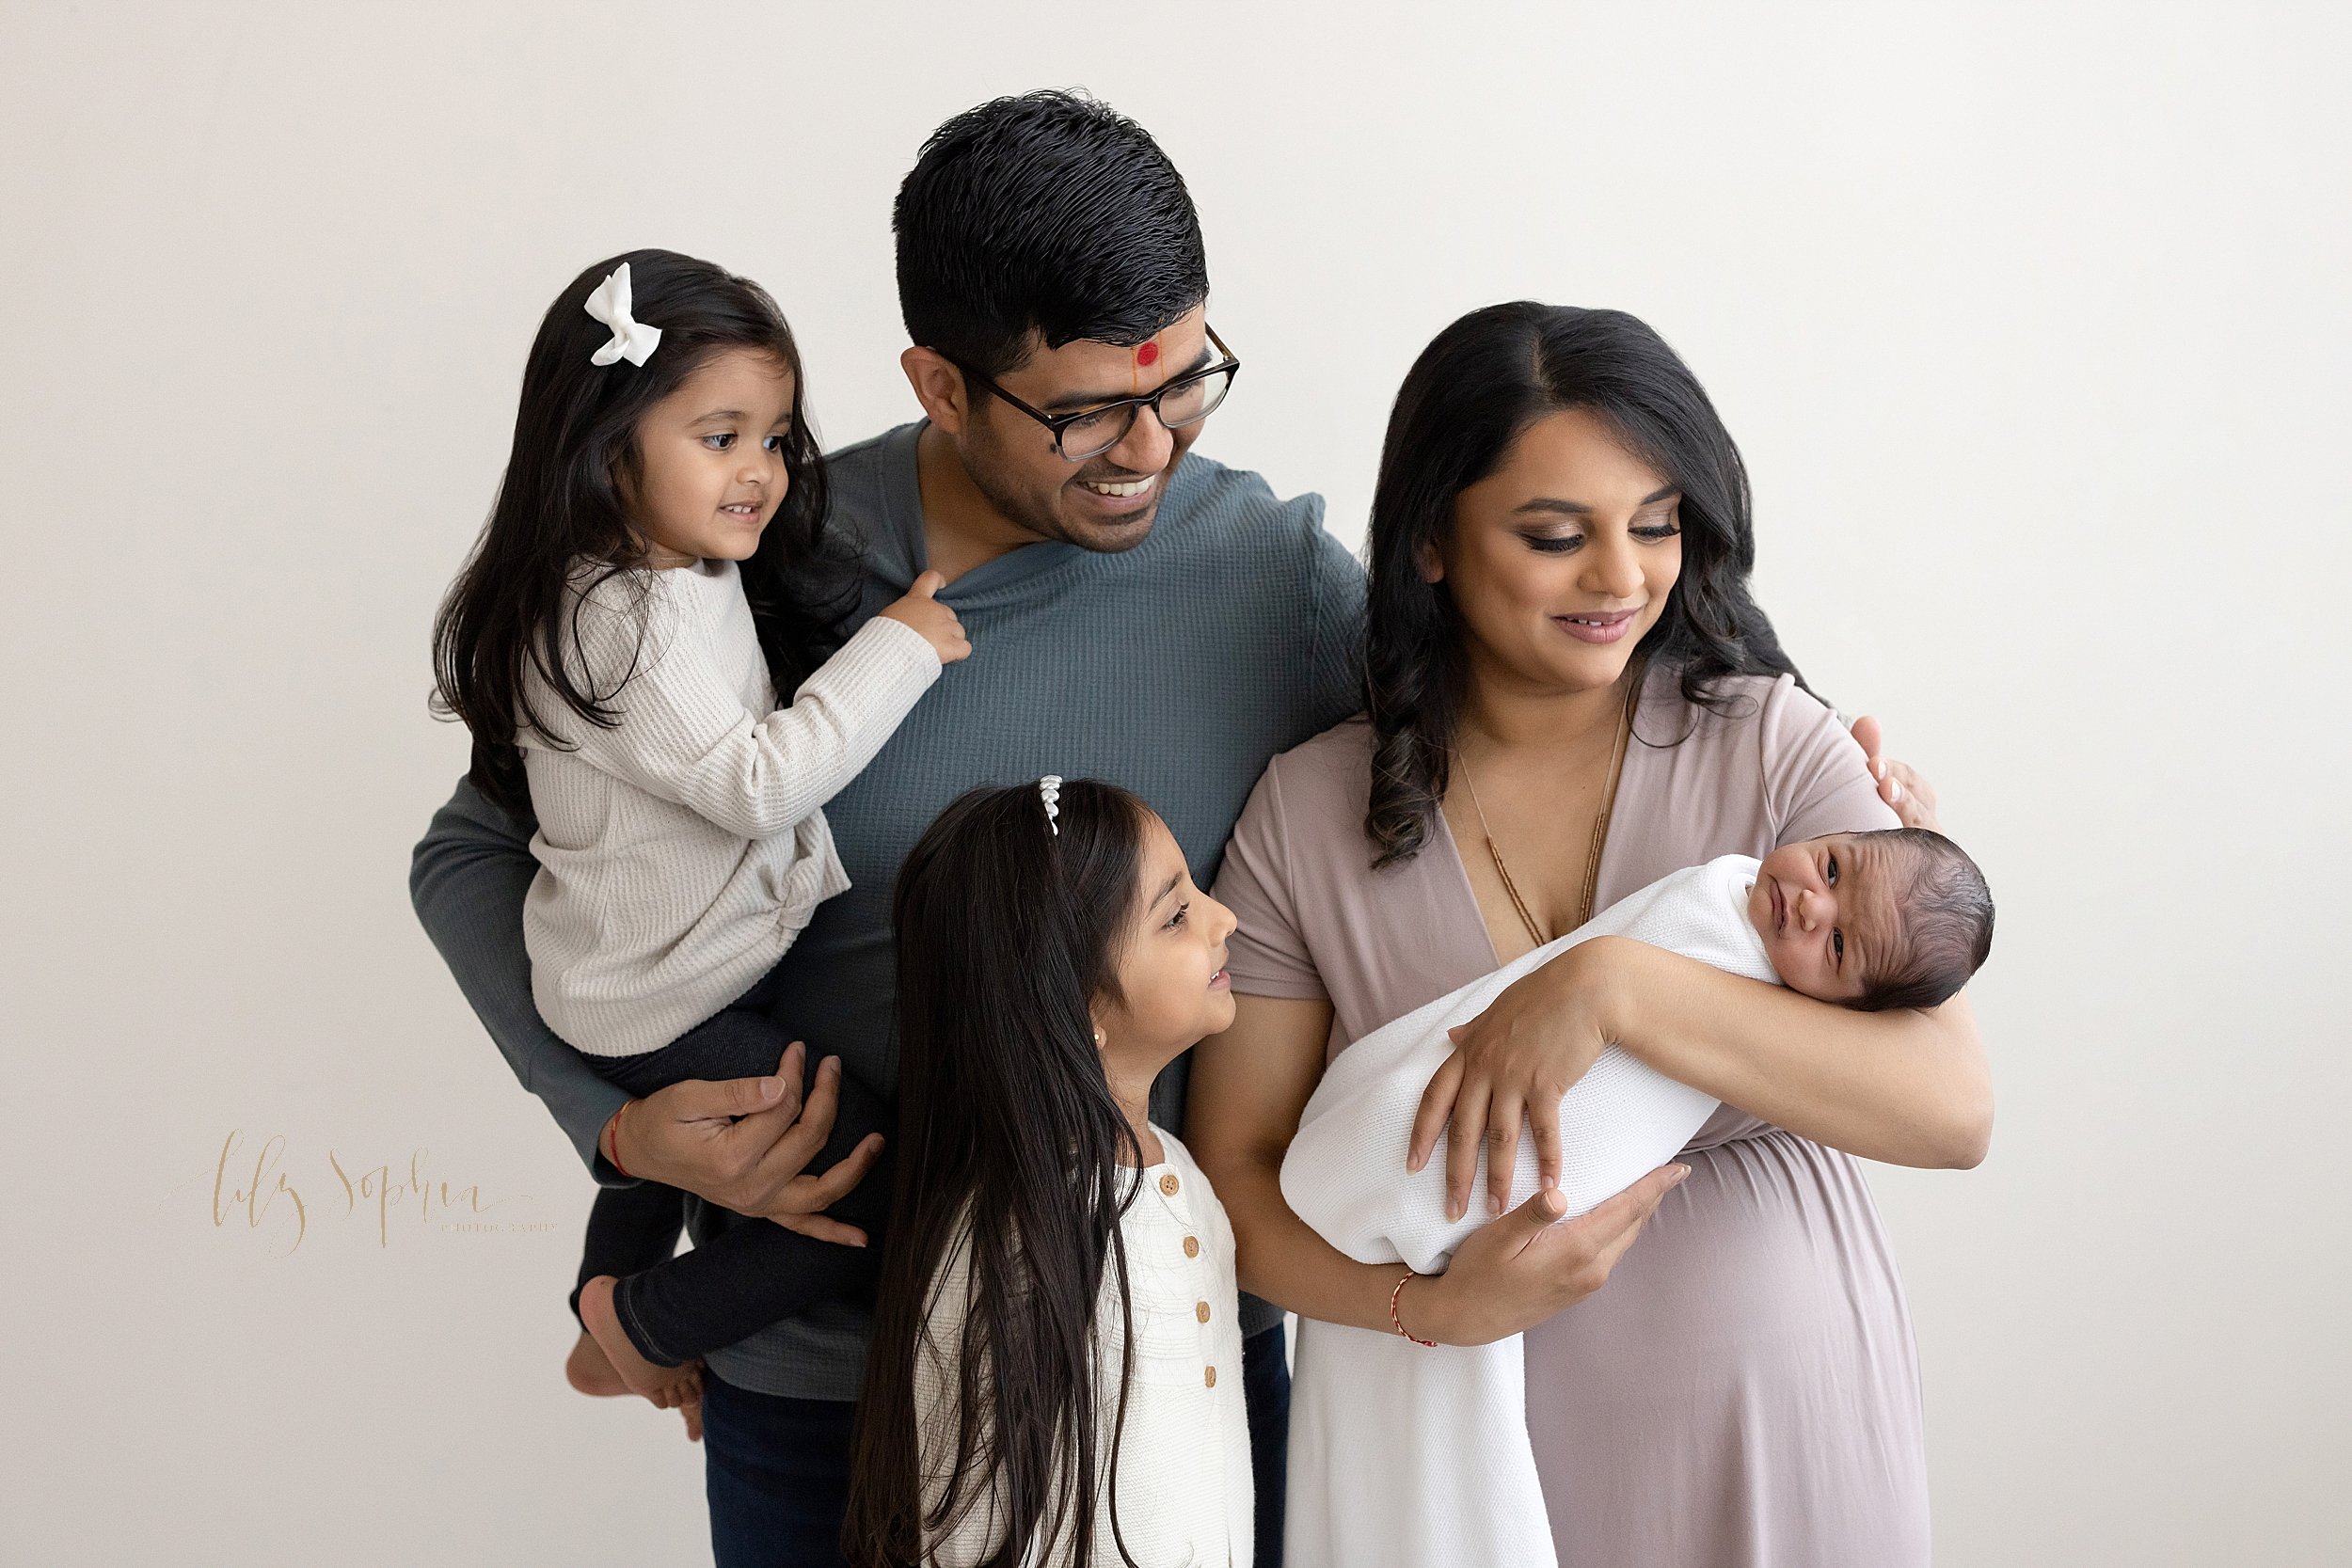  Family newborn photo of an Indian mother holding her newborn baby boy in her arms  with her husband standing behind her holding their toddler daughter in his right arm and their young daughter standing in front of dad as they all admire the baby tak